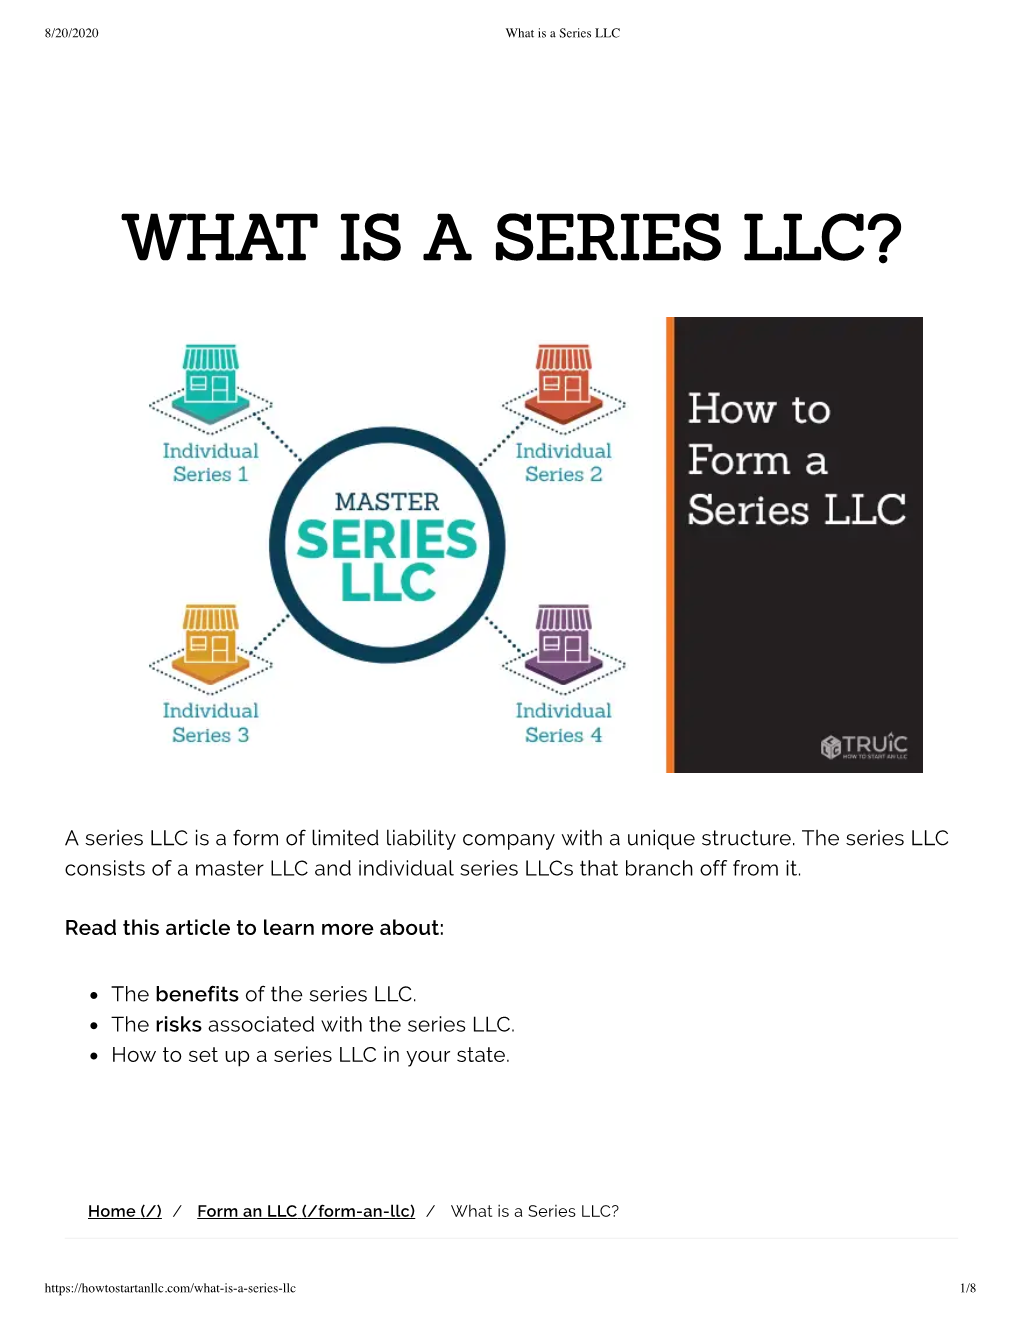 What Is a Series Llc?